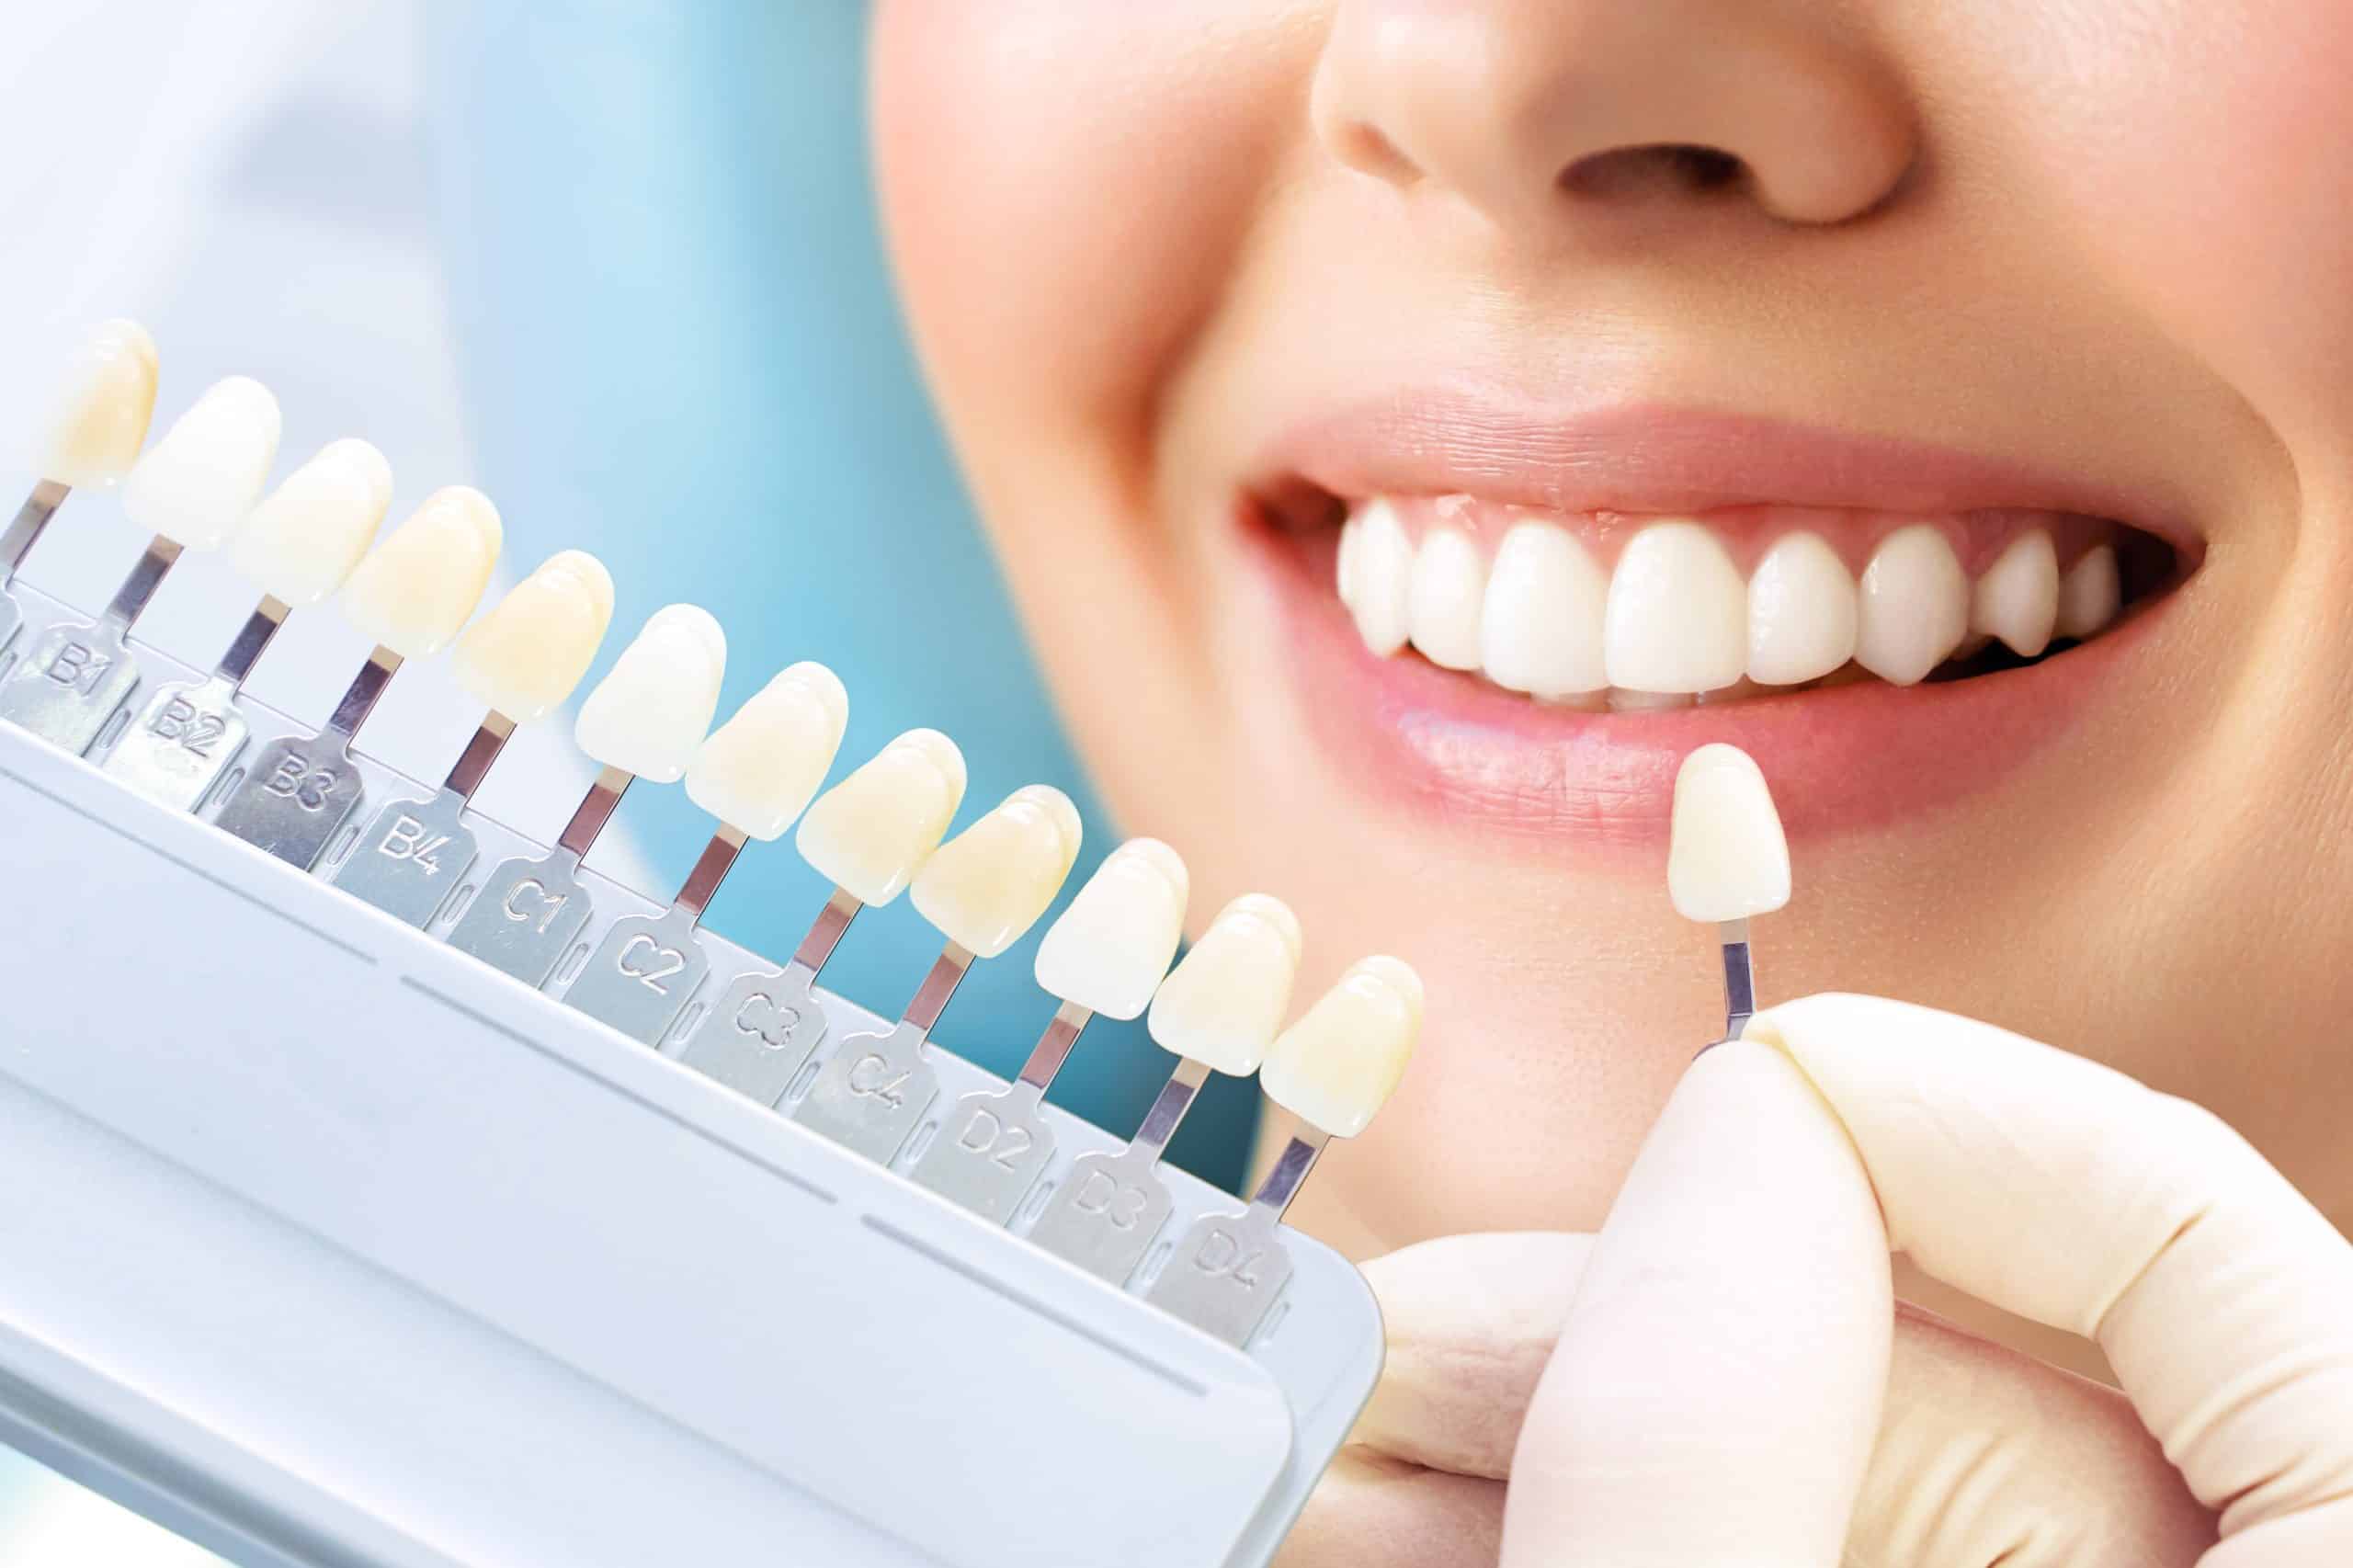 How can cosmetic dental treatments help my oral health